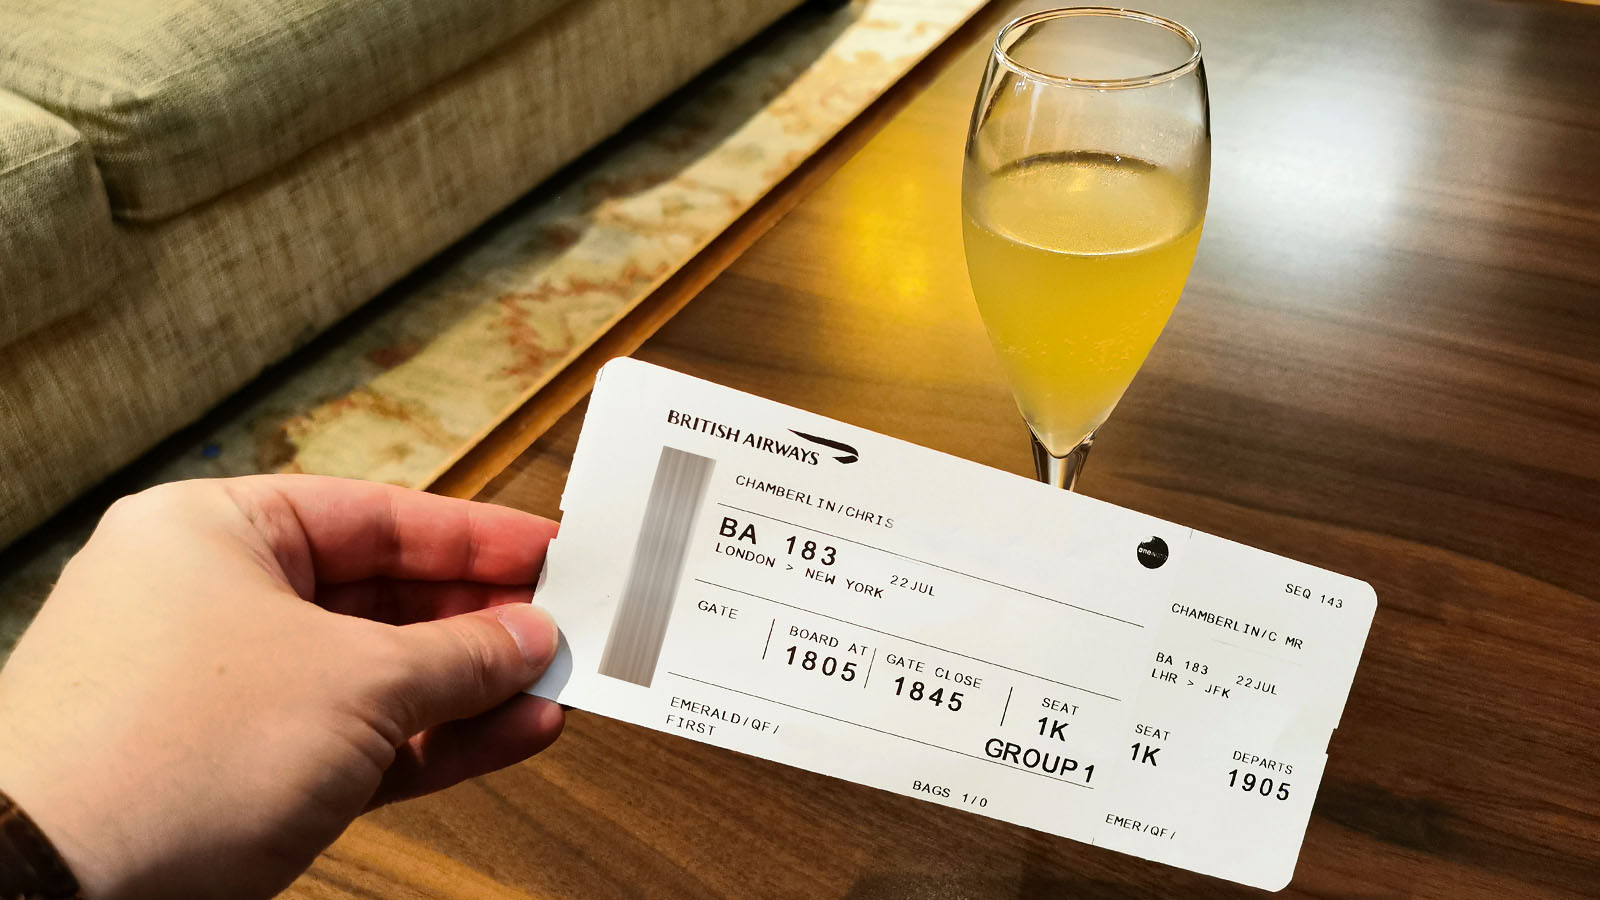 Boarding pass for travel in British Airways First